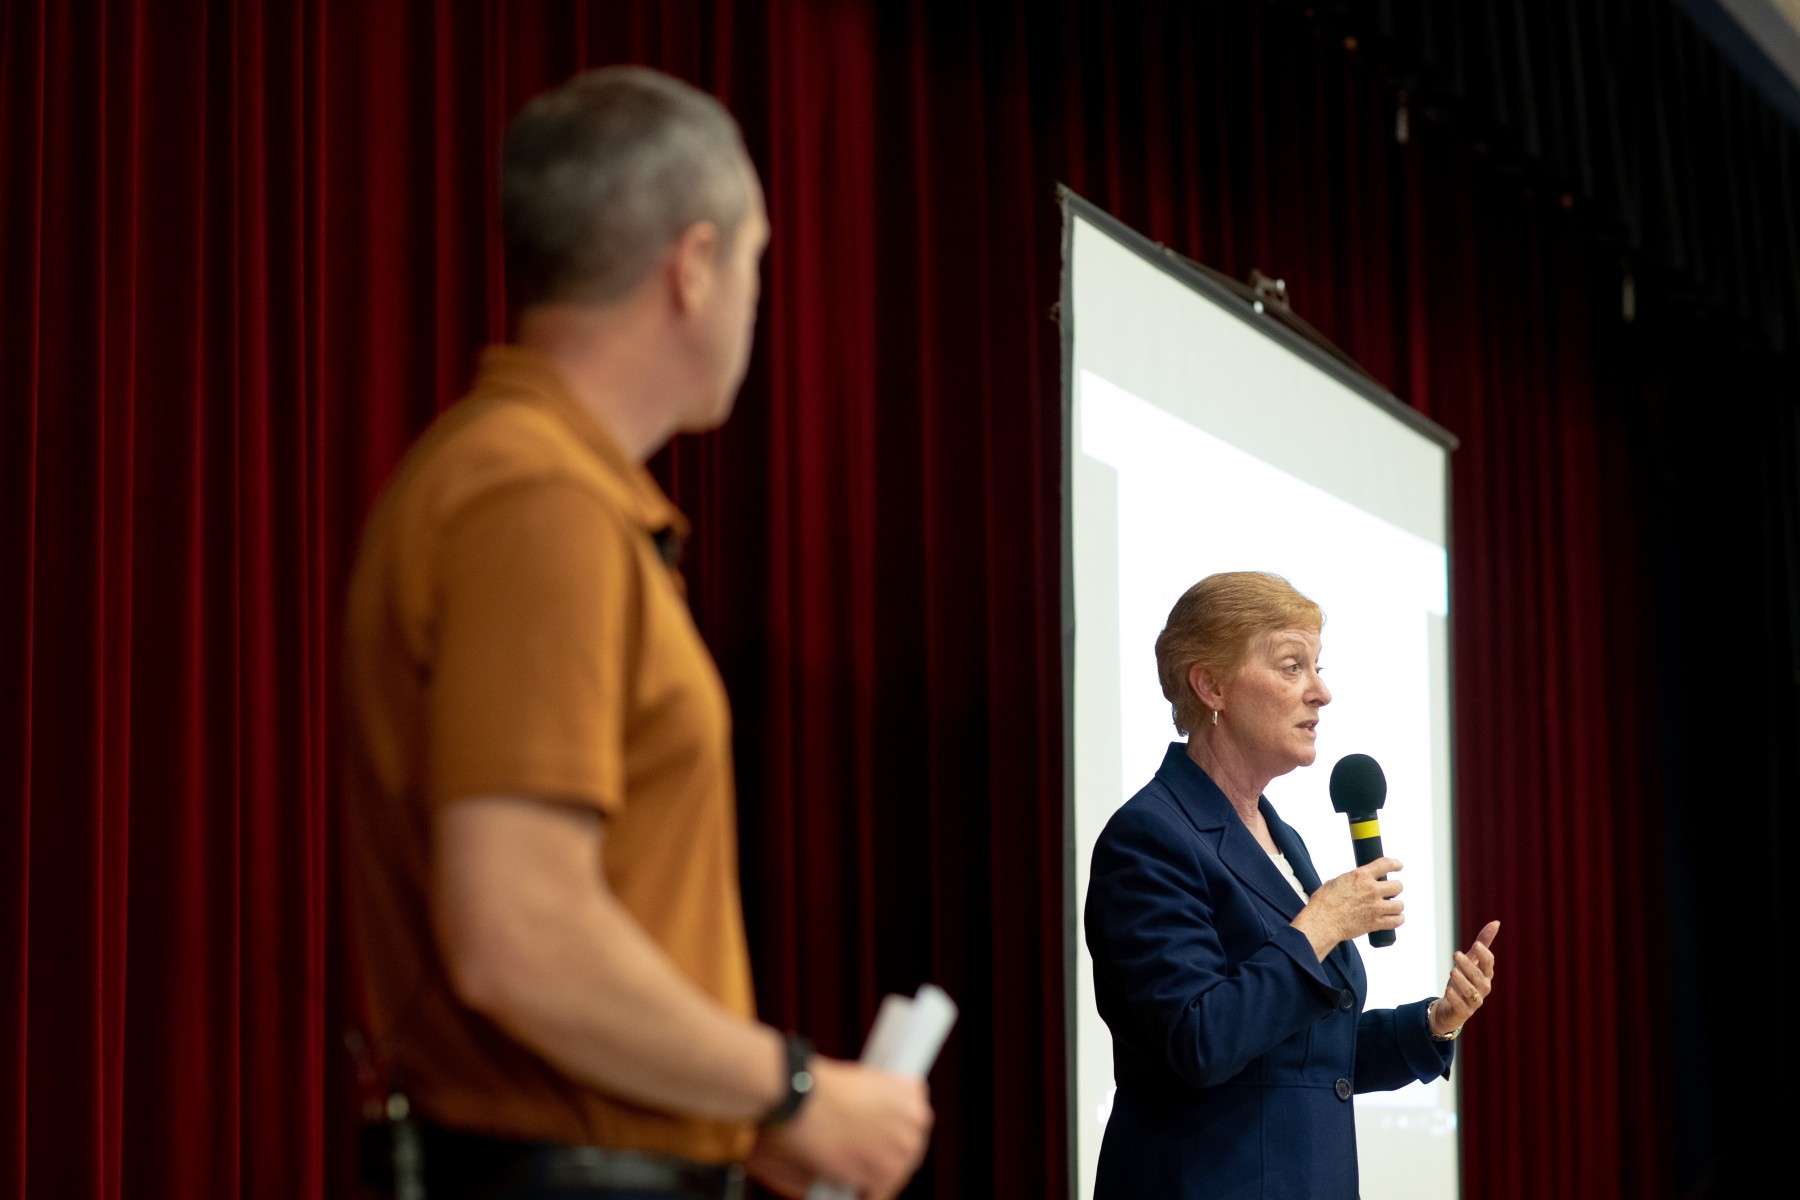 September 16, 2019: During National Recovery Month, state Senator Steve Santarsiero (D-10) hosted an Addiction Prevention and Recovery Open House at William Penn Middle School in Yardley.